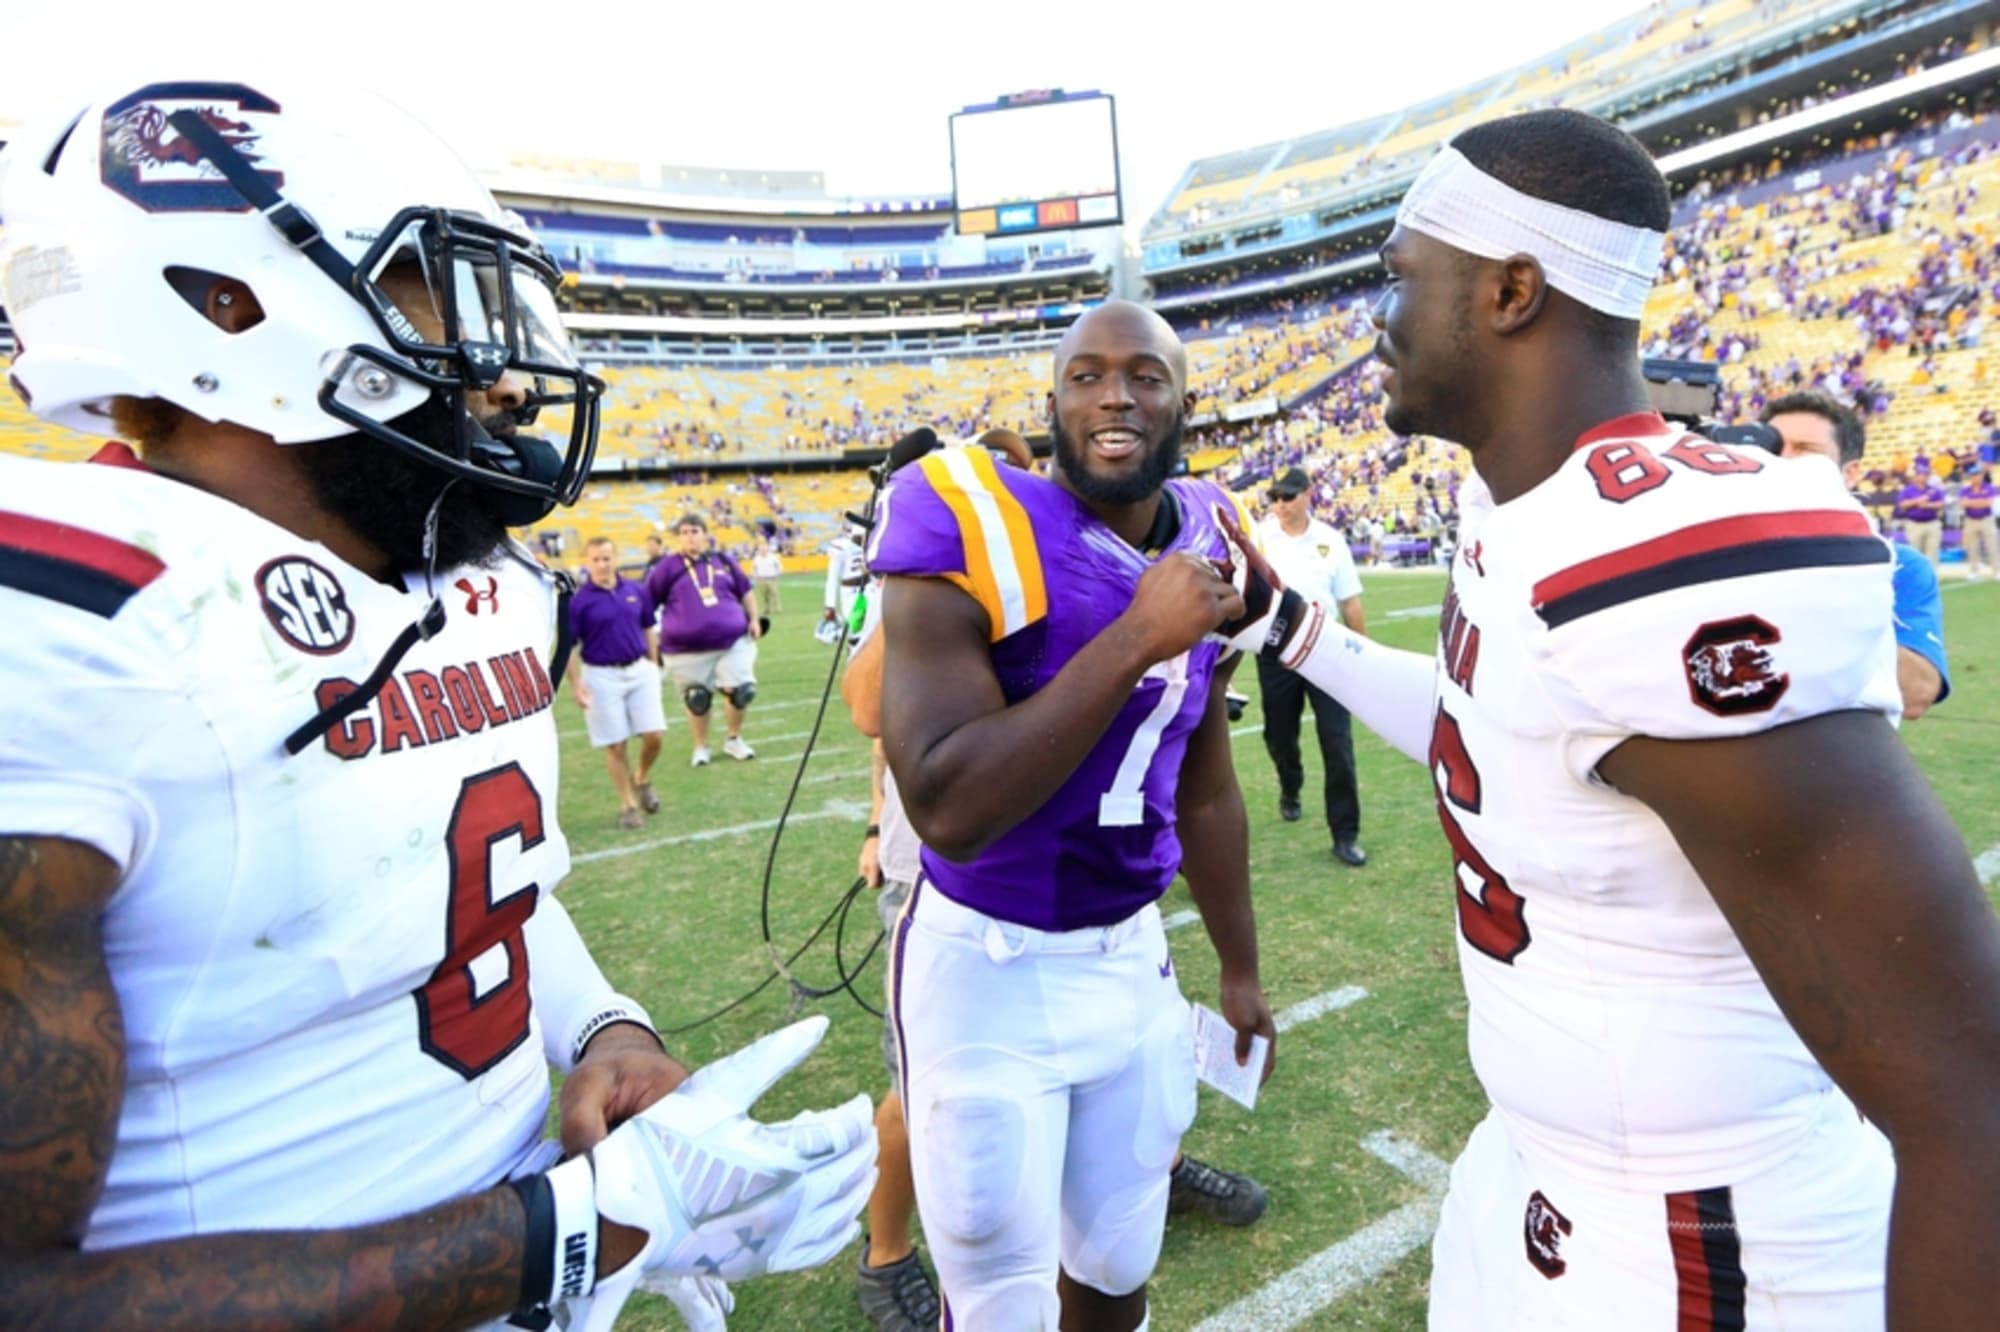 Ncaa Says Leonard Fournette Can Auction His Jersey Remain Gutless Anyways